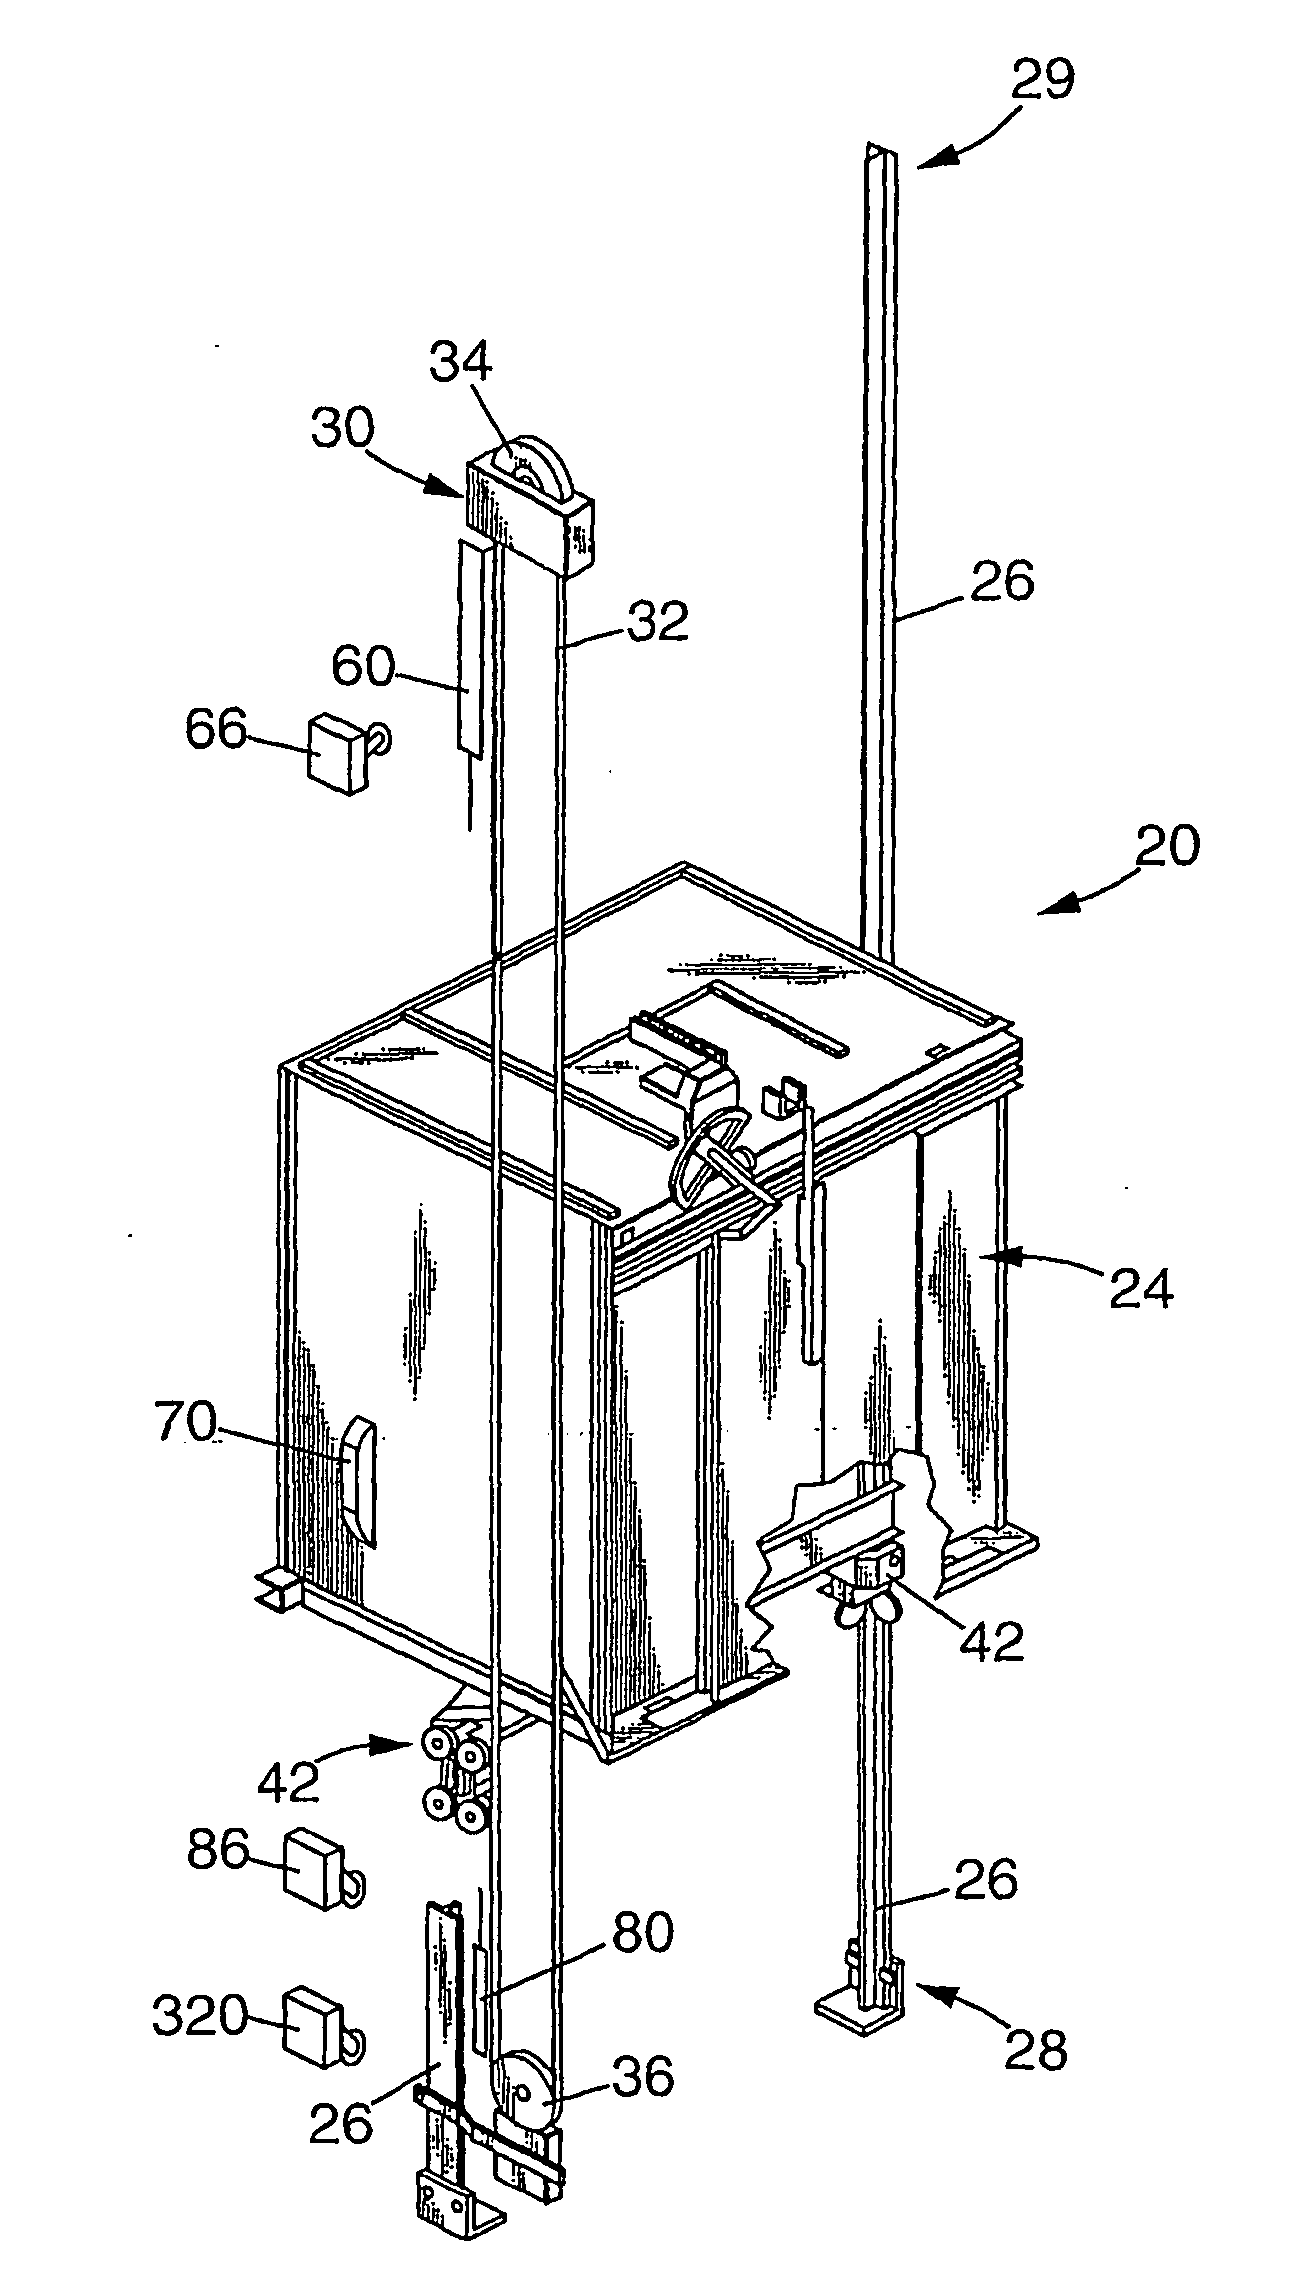 Elevator having a shallow pit and/or a low overhead